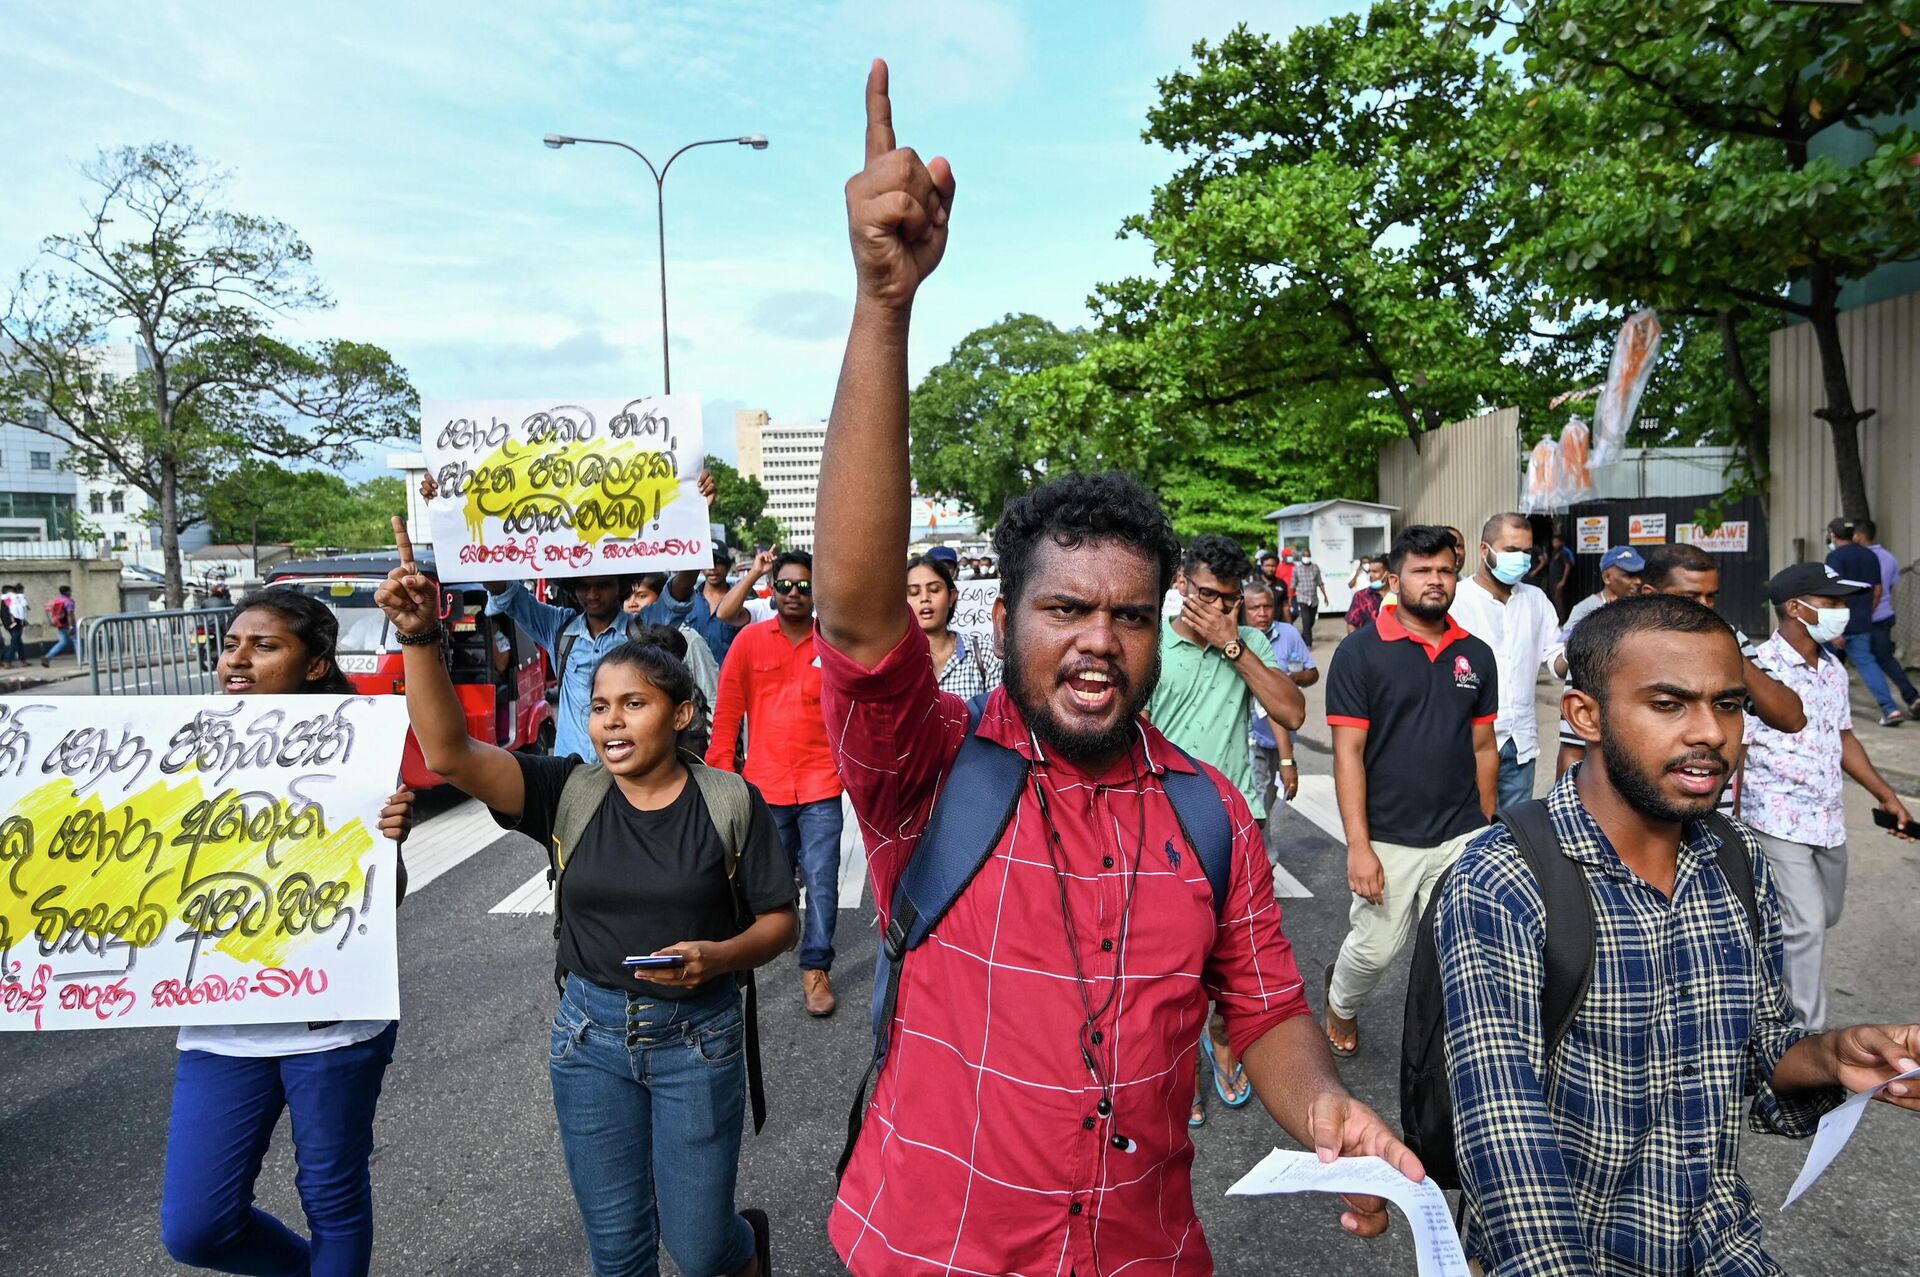 Protestors take part in an anti-government demonstration outside the Sri Lanka police headquarters in Colombo on May 16, 2022, - Sputnik International, 1920, 17.05.2022